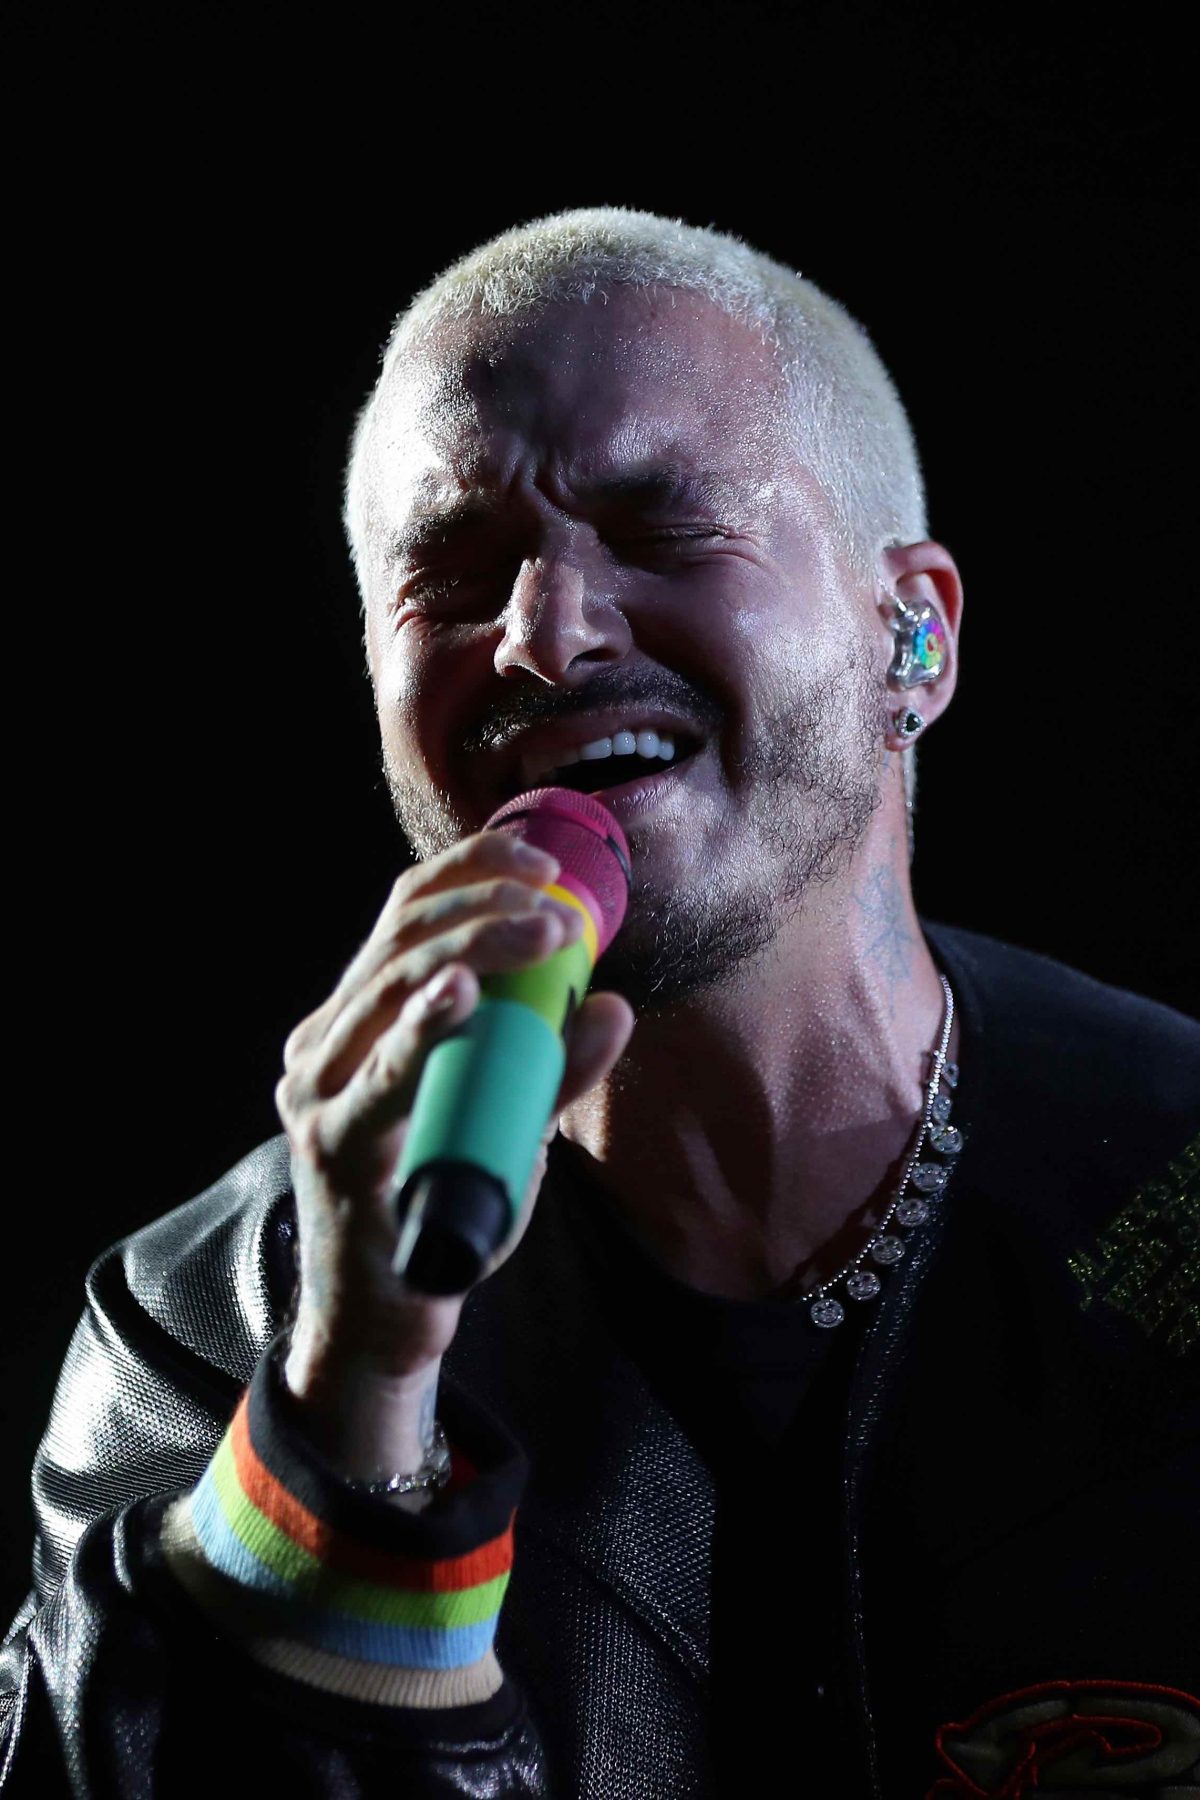 Colombian singer J Balvin performs on stage during the Uforia Latino Mix Live: Dallas at Dos Equis Pavilion on August 5, 2021 in Dallas, Texas.